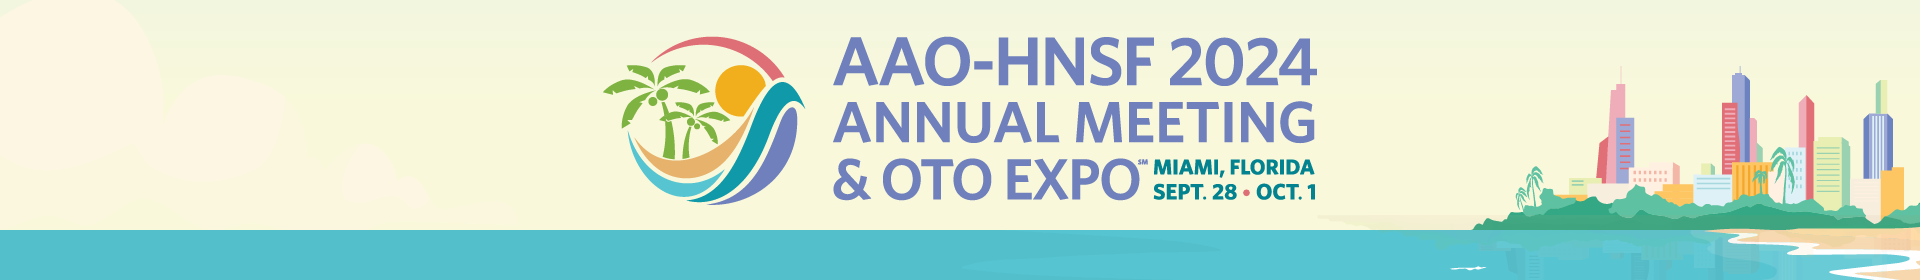 AAO-HNSF 2024 Annual Meeting & OTO EXPO Event Banner